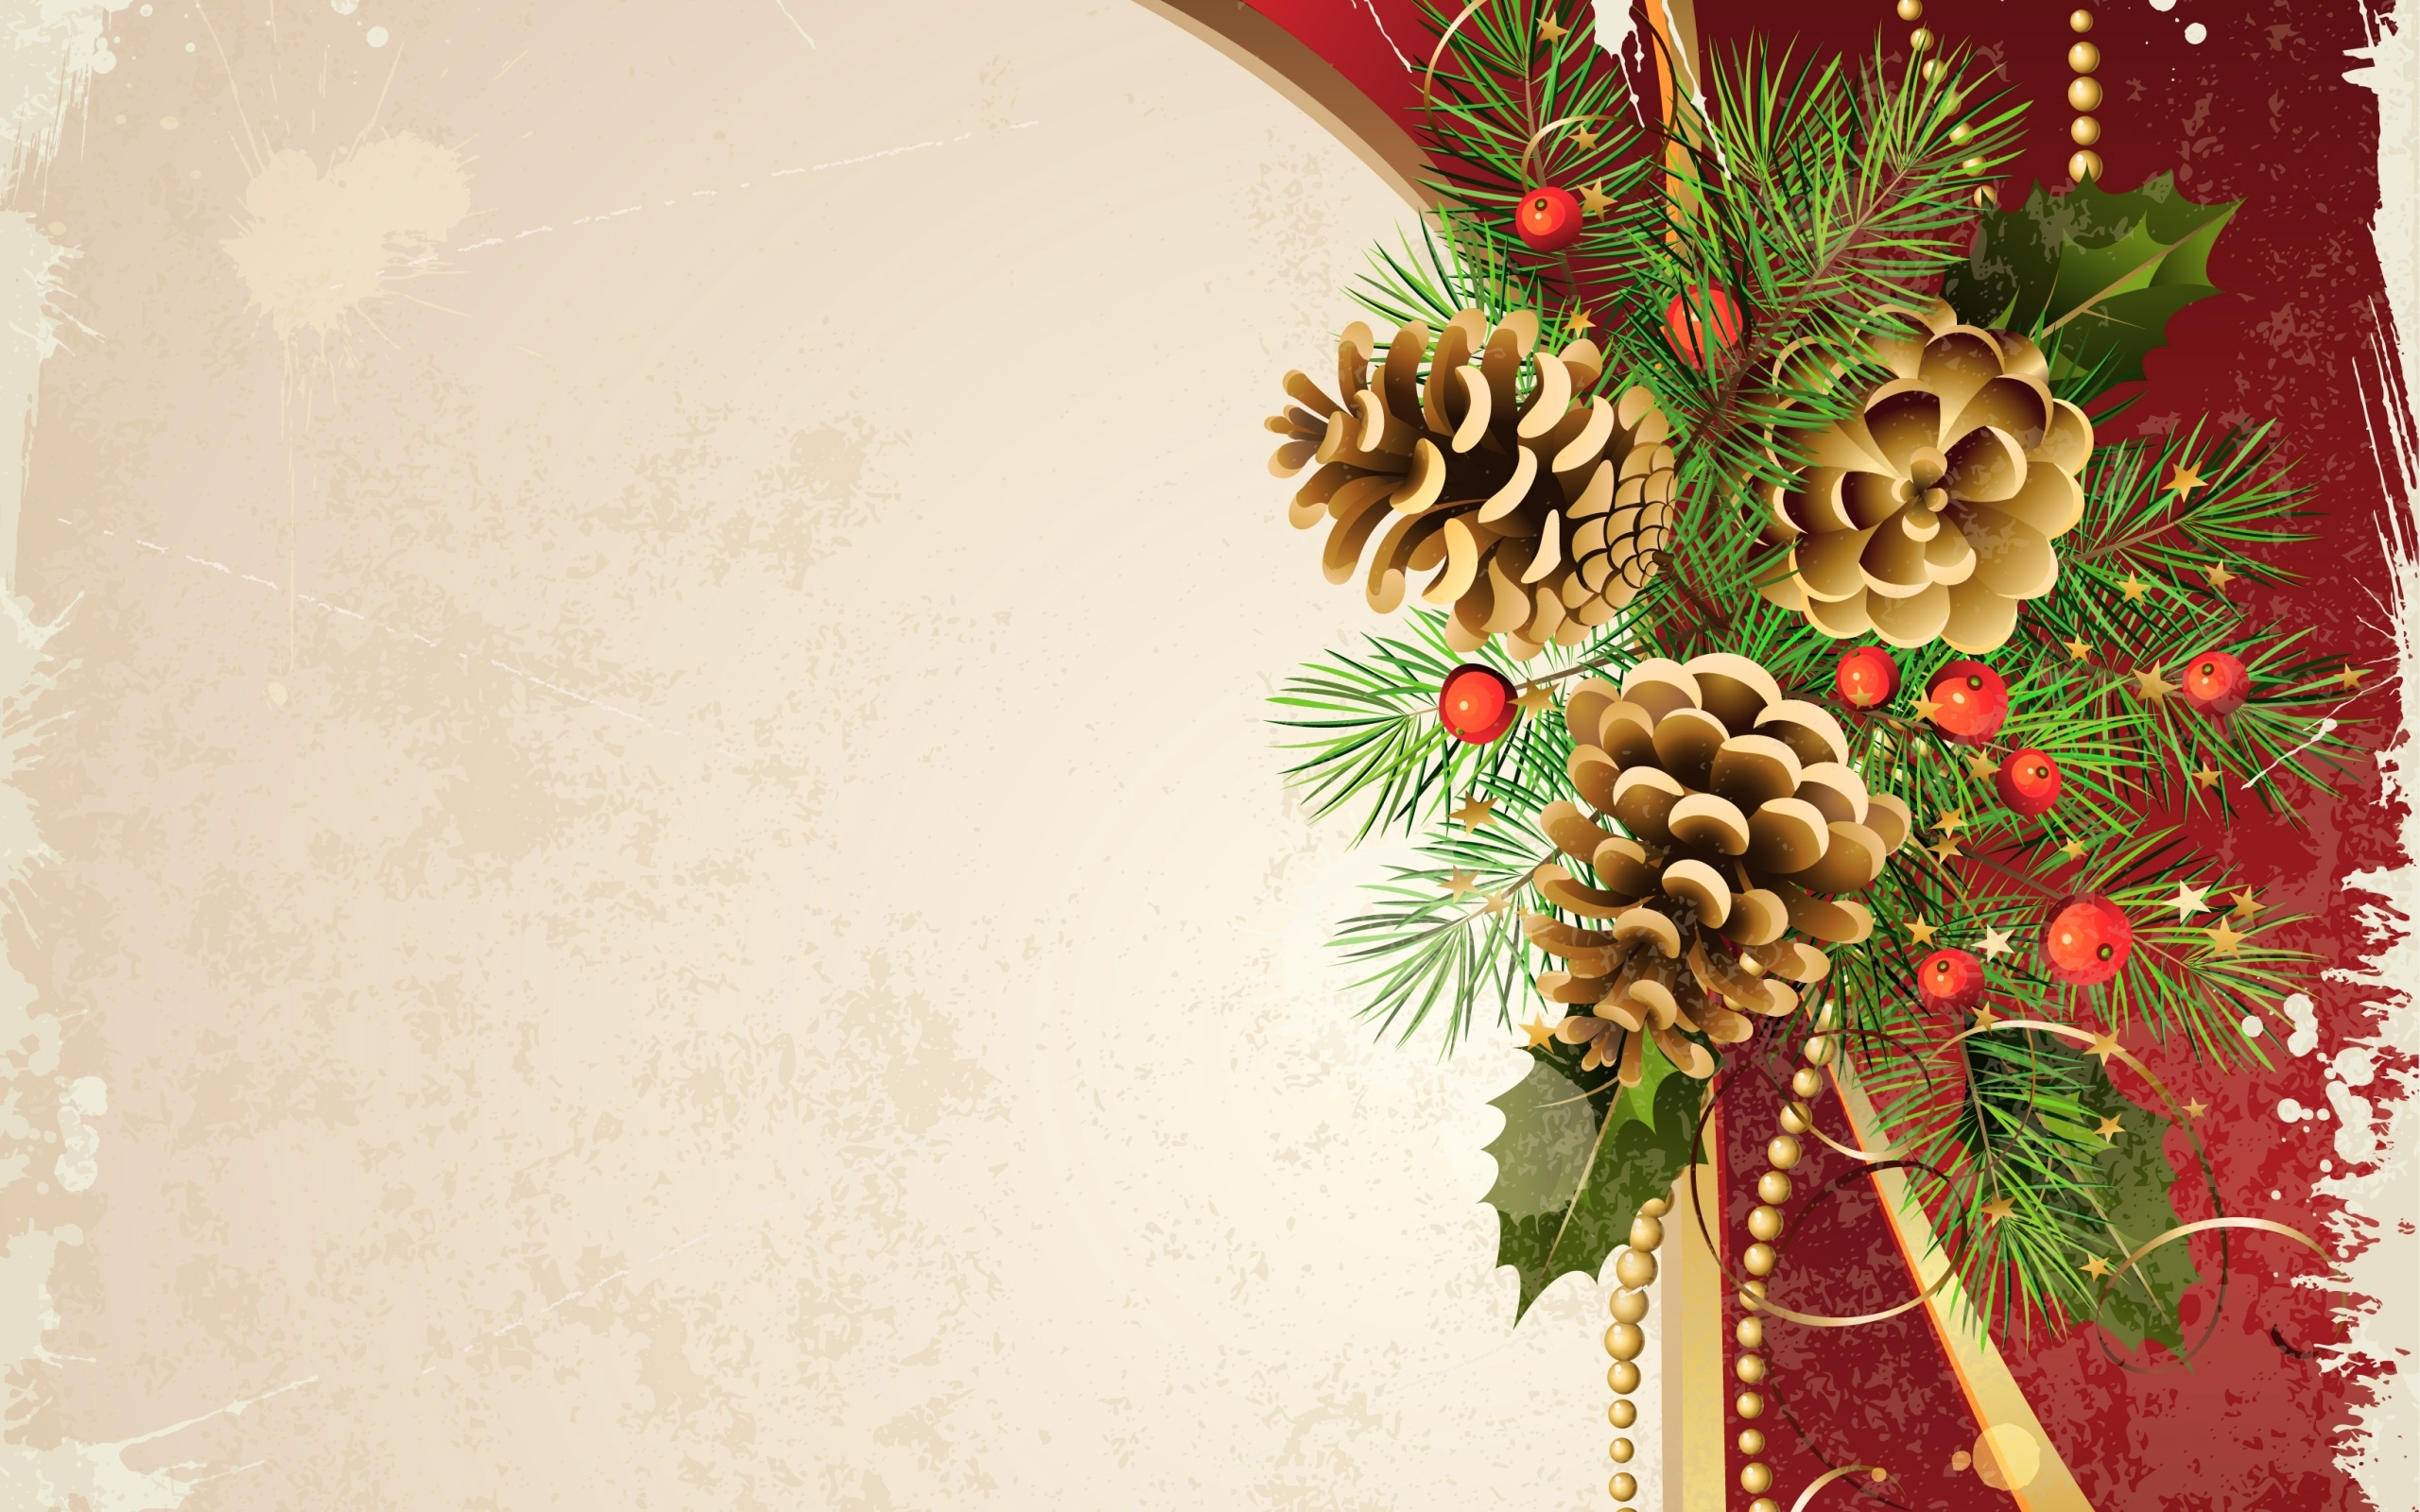 Christmas_Background_with_Pine_Cones.jpg?m=1399676400